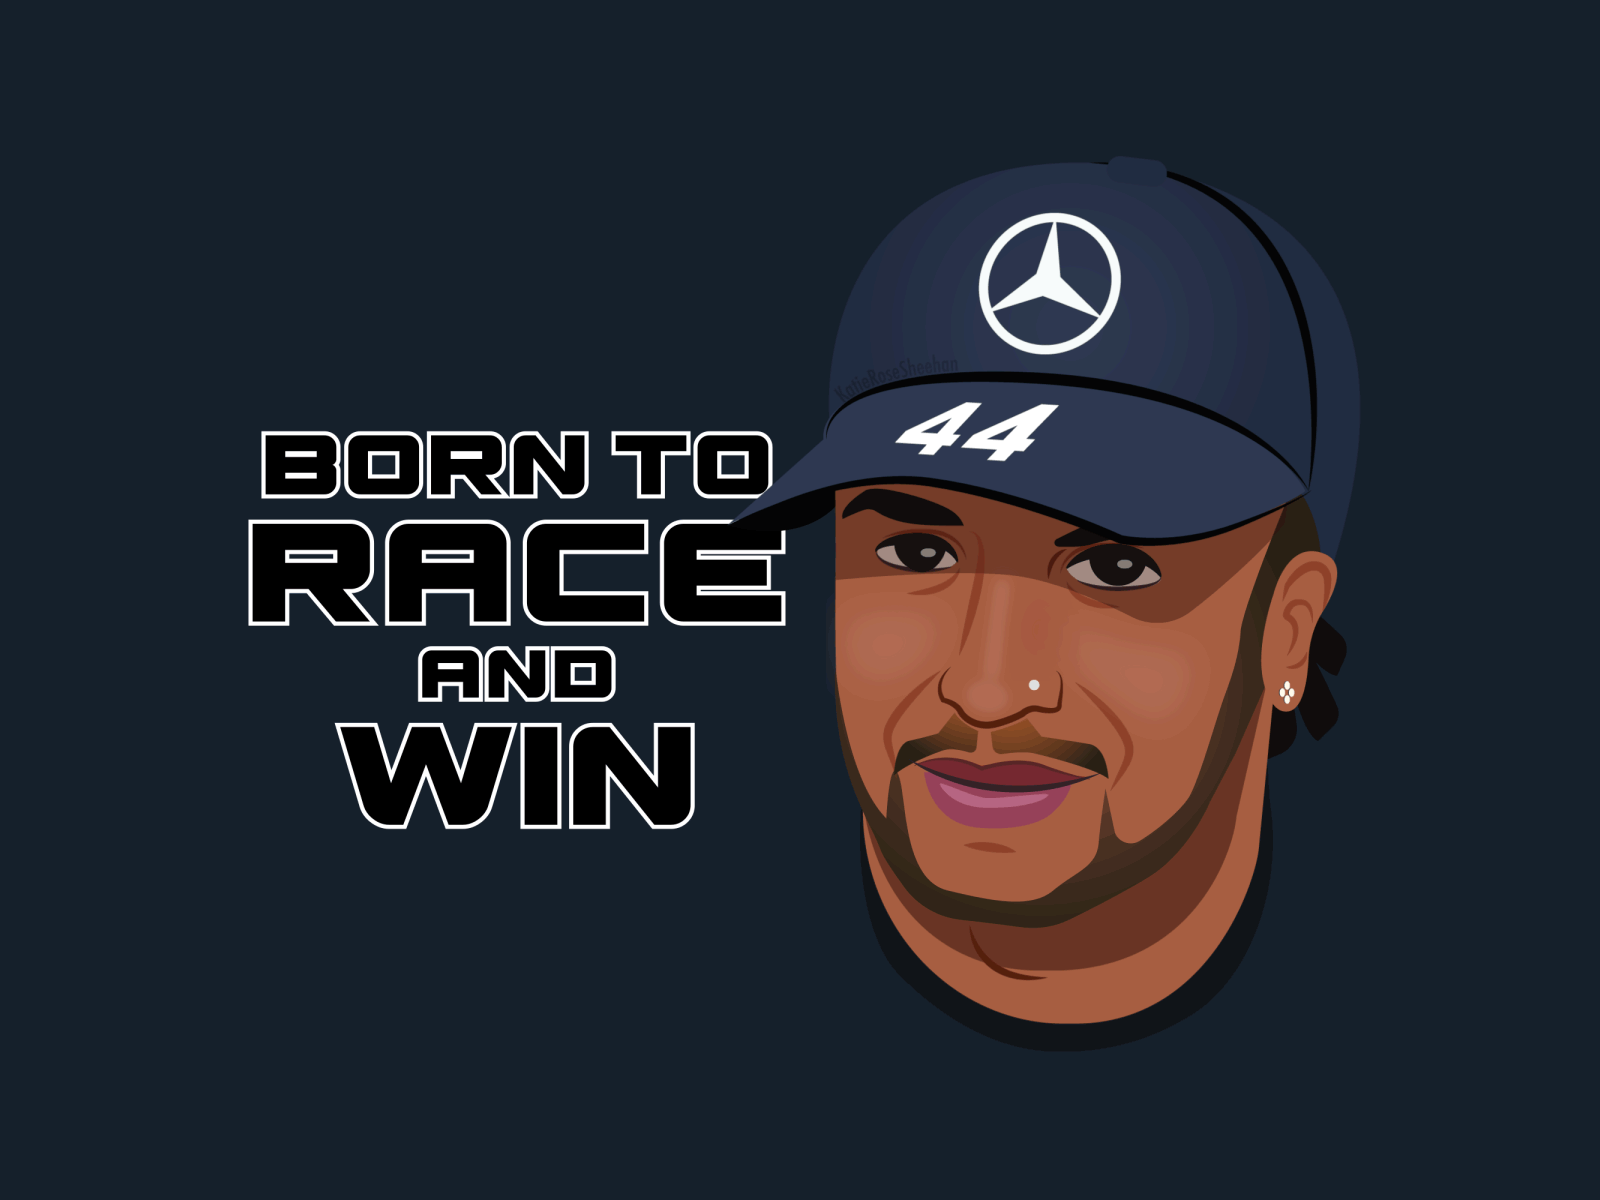 Lewis Hamilton GIPHY sticker: Born To Race and Win adobe animation born to race and win character design f1 giphy giphy sticker graphic design hamilton illustration illustrator lewis hamilton mercedes motion graphics racing social media sticker sticker vector